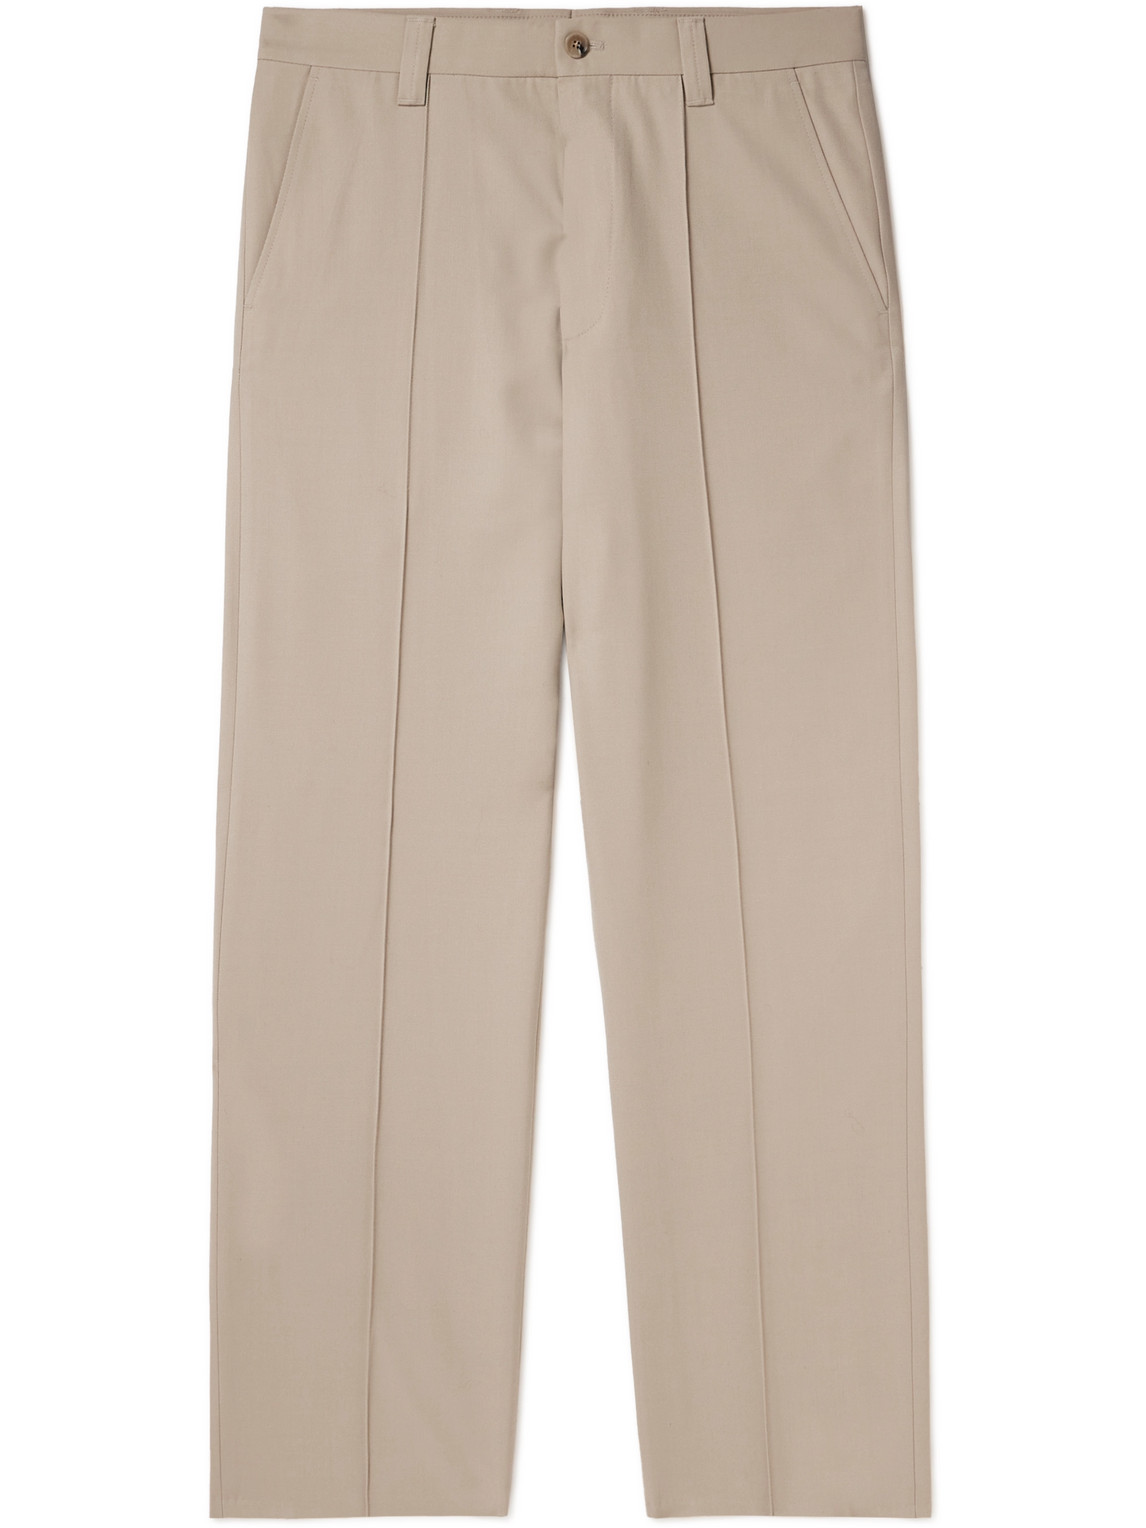 Throwing Fits Tauber 1728 Straight-Leg Pleated Twill Trousers